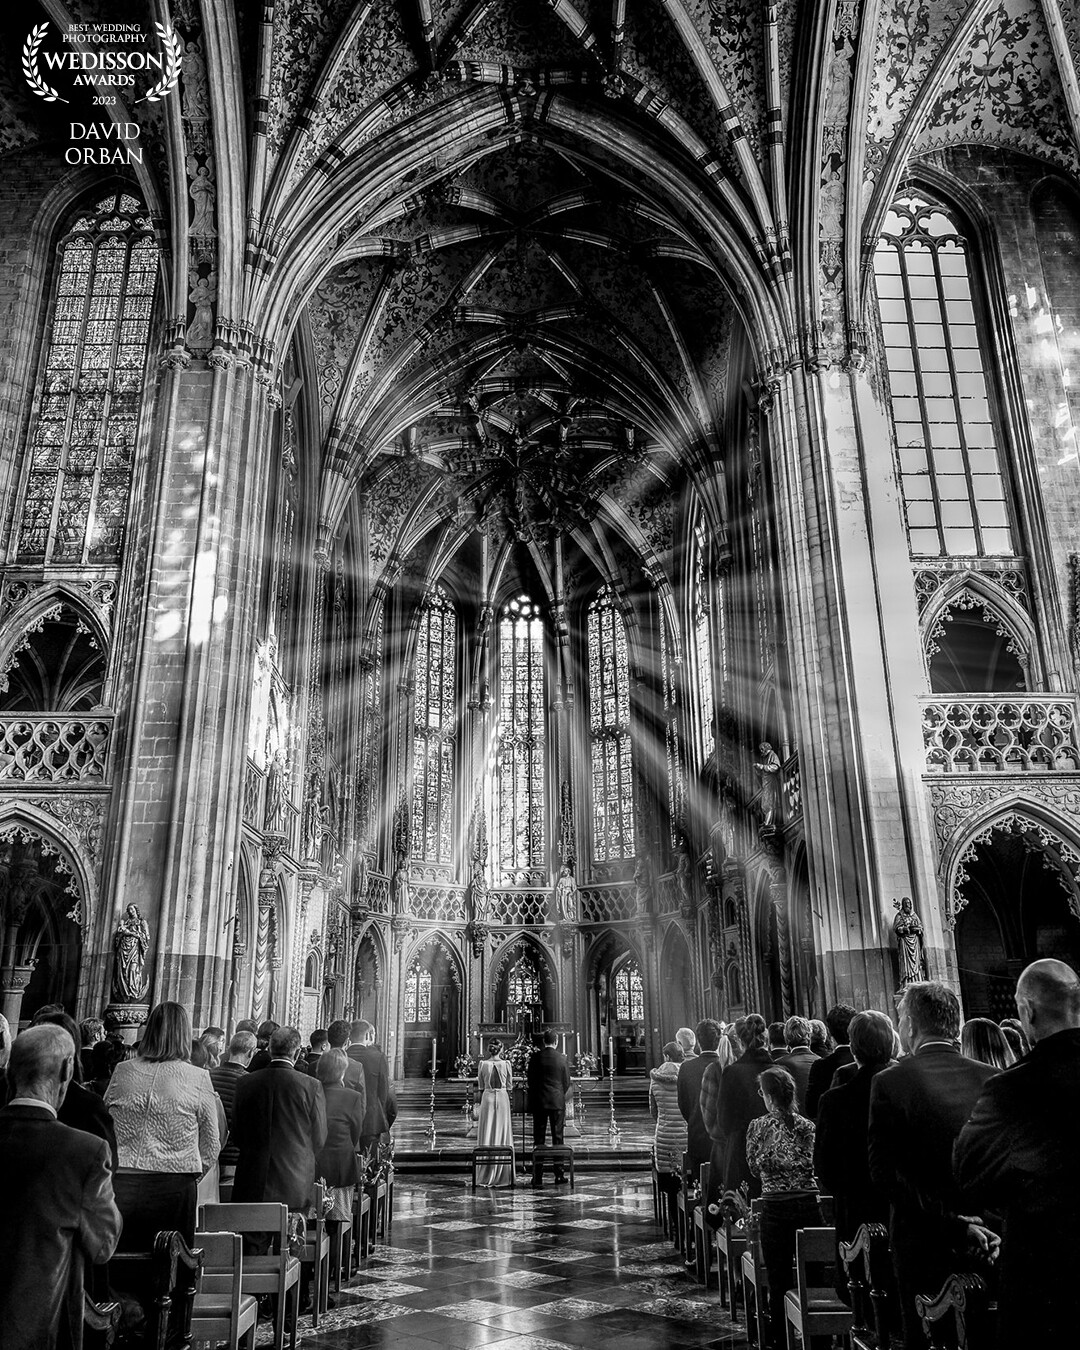 The superb Saint-Jacques church in Liège in Belgium, many guests, when the sun comes to the center of the stained glass windows (booster treatment) a few moments before the passage of the wedding bands, it is then a magical and romantic moment.